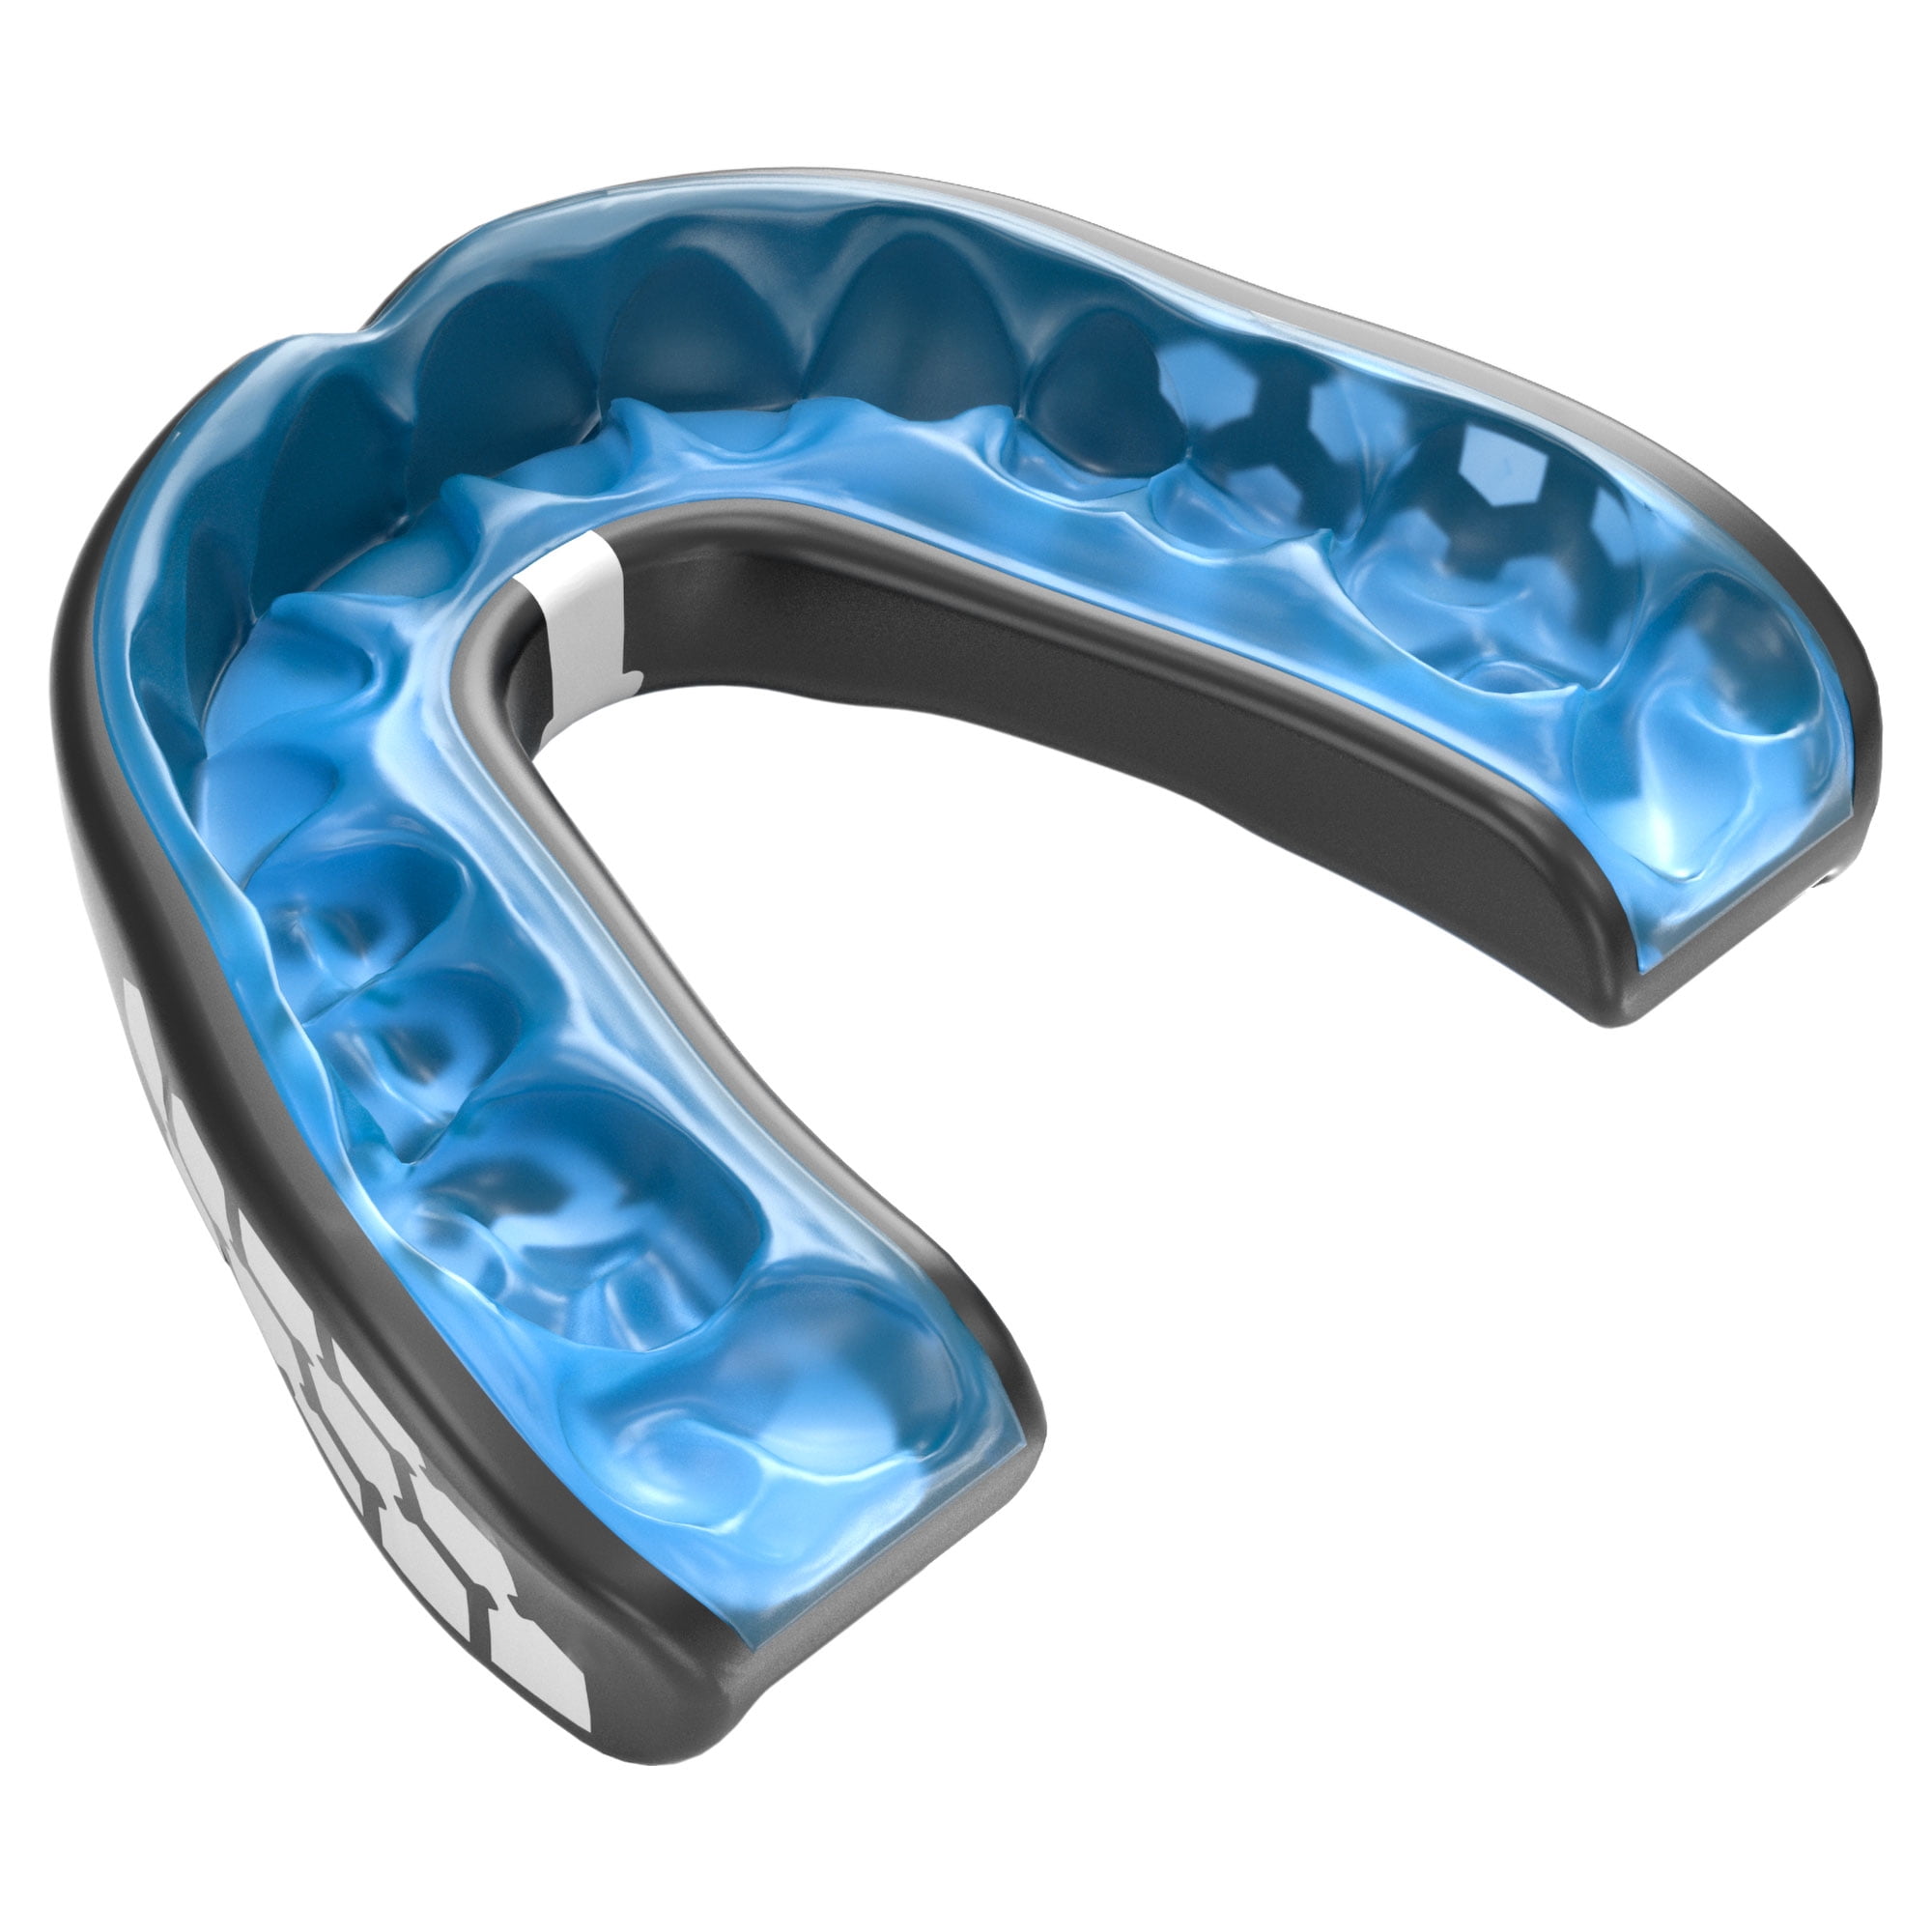 Shock Doctor Gel Max Mouthguard Convertible Youth or Adult Gum Piece Mouth Guard 